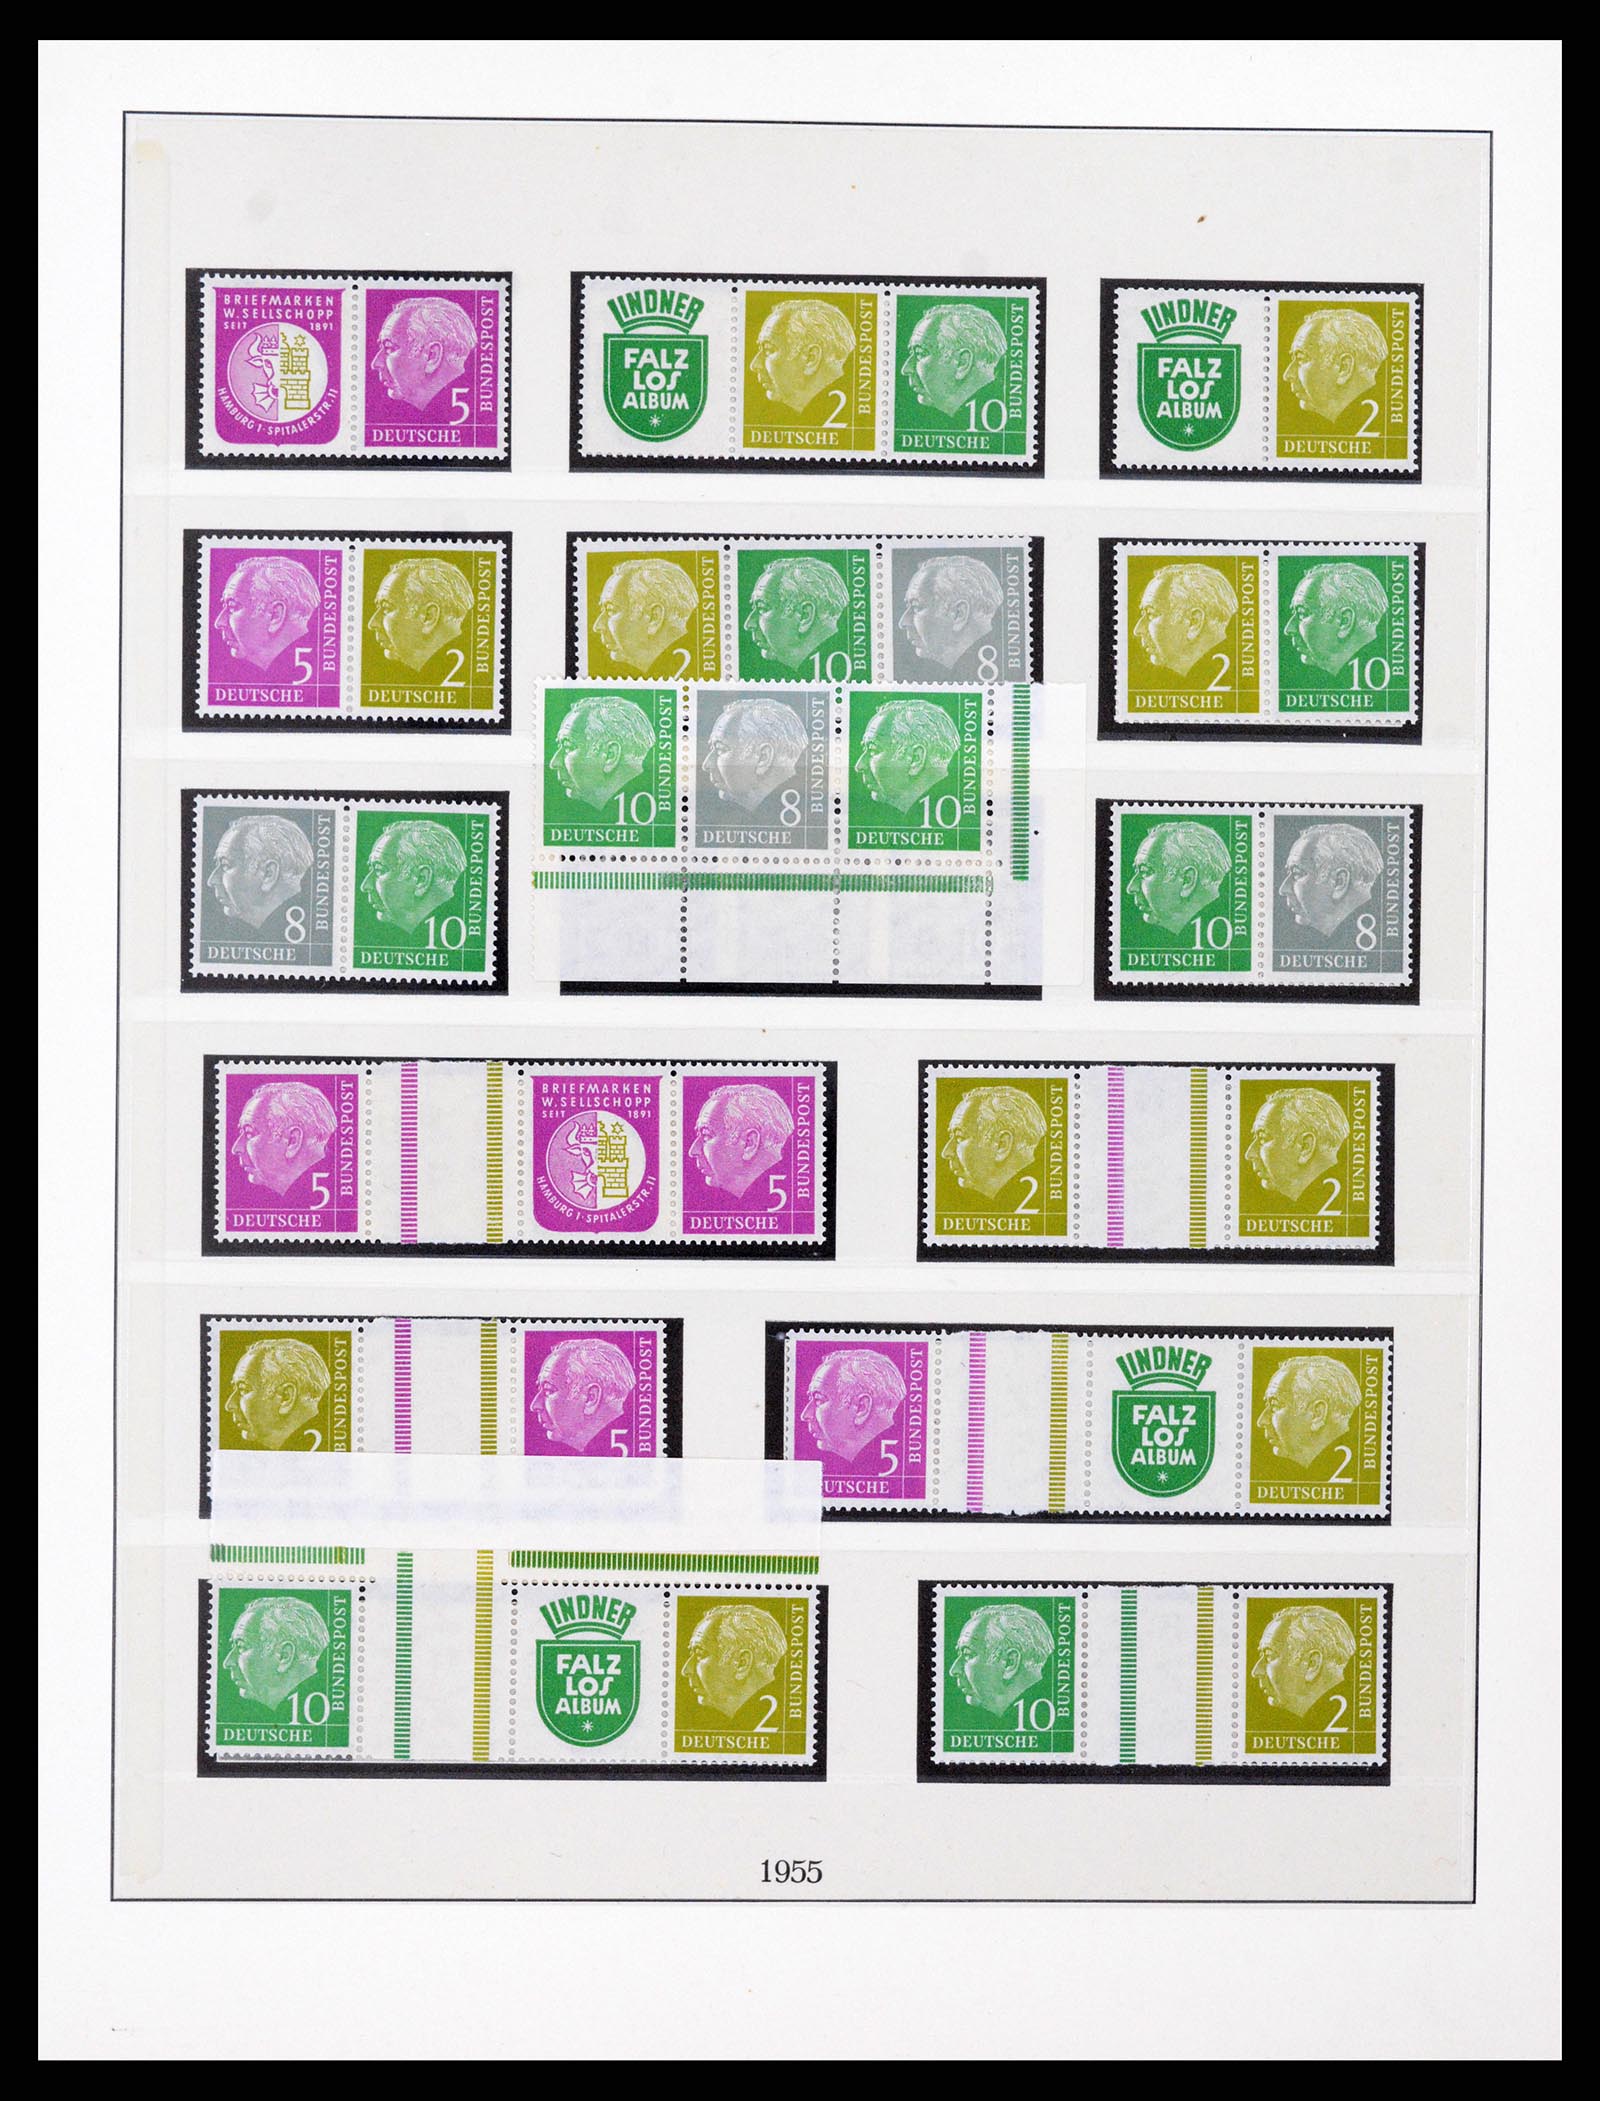 37336 001 - Stamp collection 37336 Bundespost combinations 1955-1980.